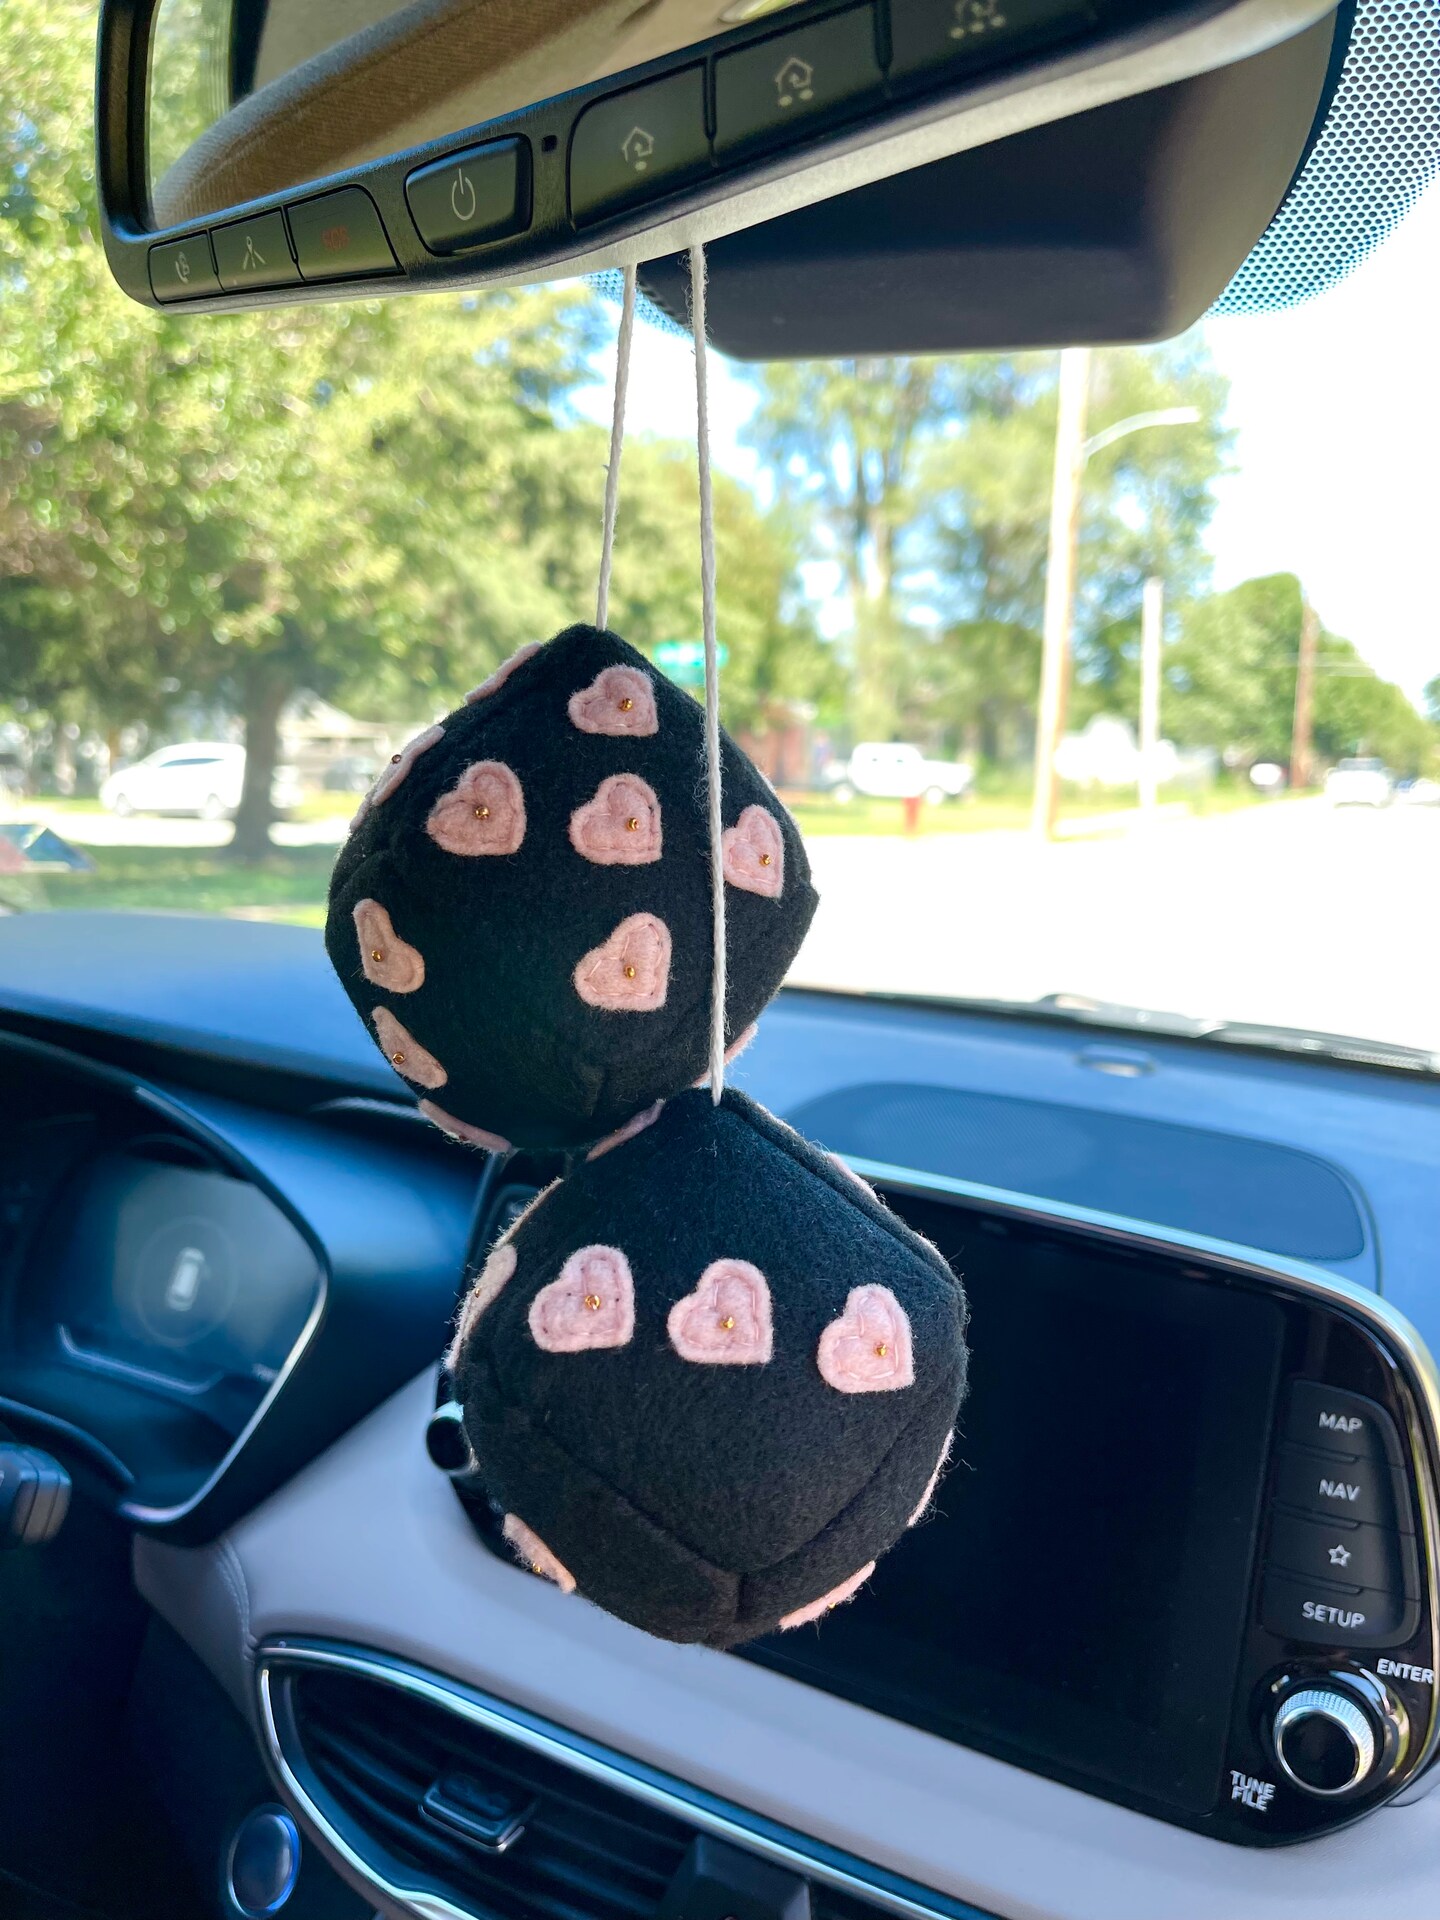 Chunky Black and Pink Hanging Dice for Cars or Room Decor, Gifts for Teens,  Rearview Mirror Accessories, Boho Retro Style